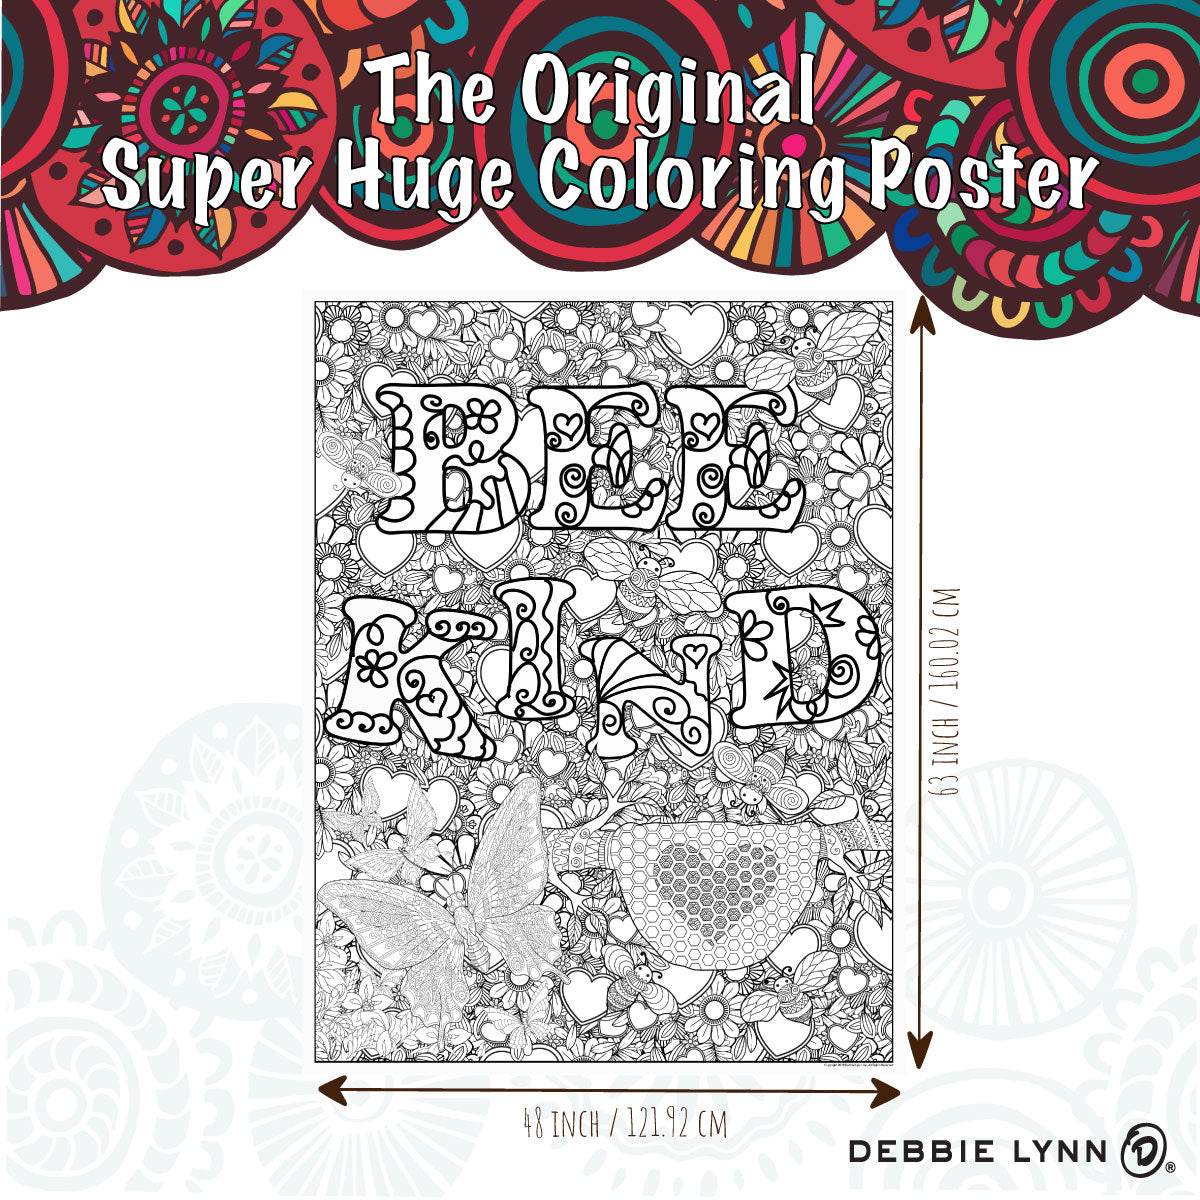 DEBBIE LYNN - The Original Jumbo Coloring Poster. Huge 48” x 63” Format,  The Biggest on The Market! Choose from 16 Great Designs Made for All Ages.